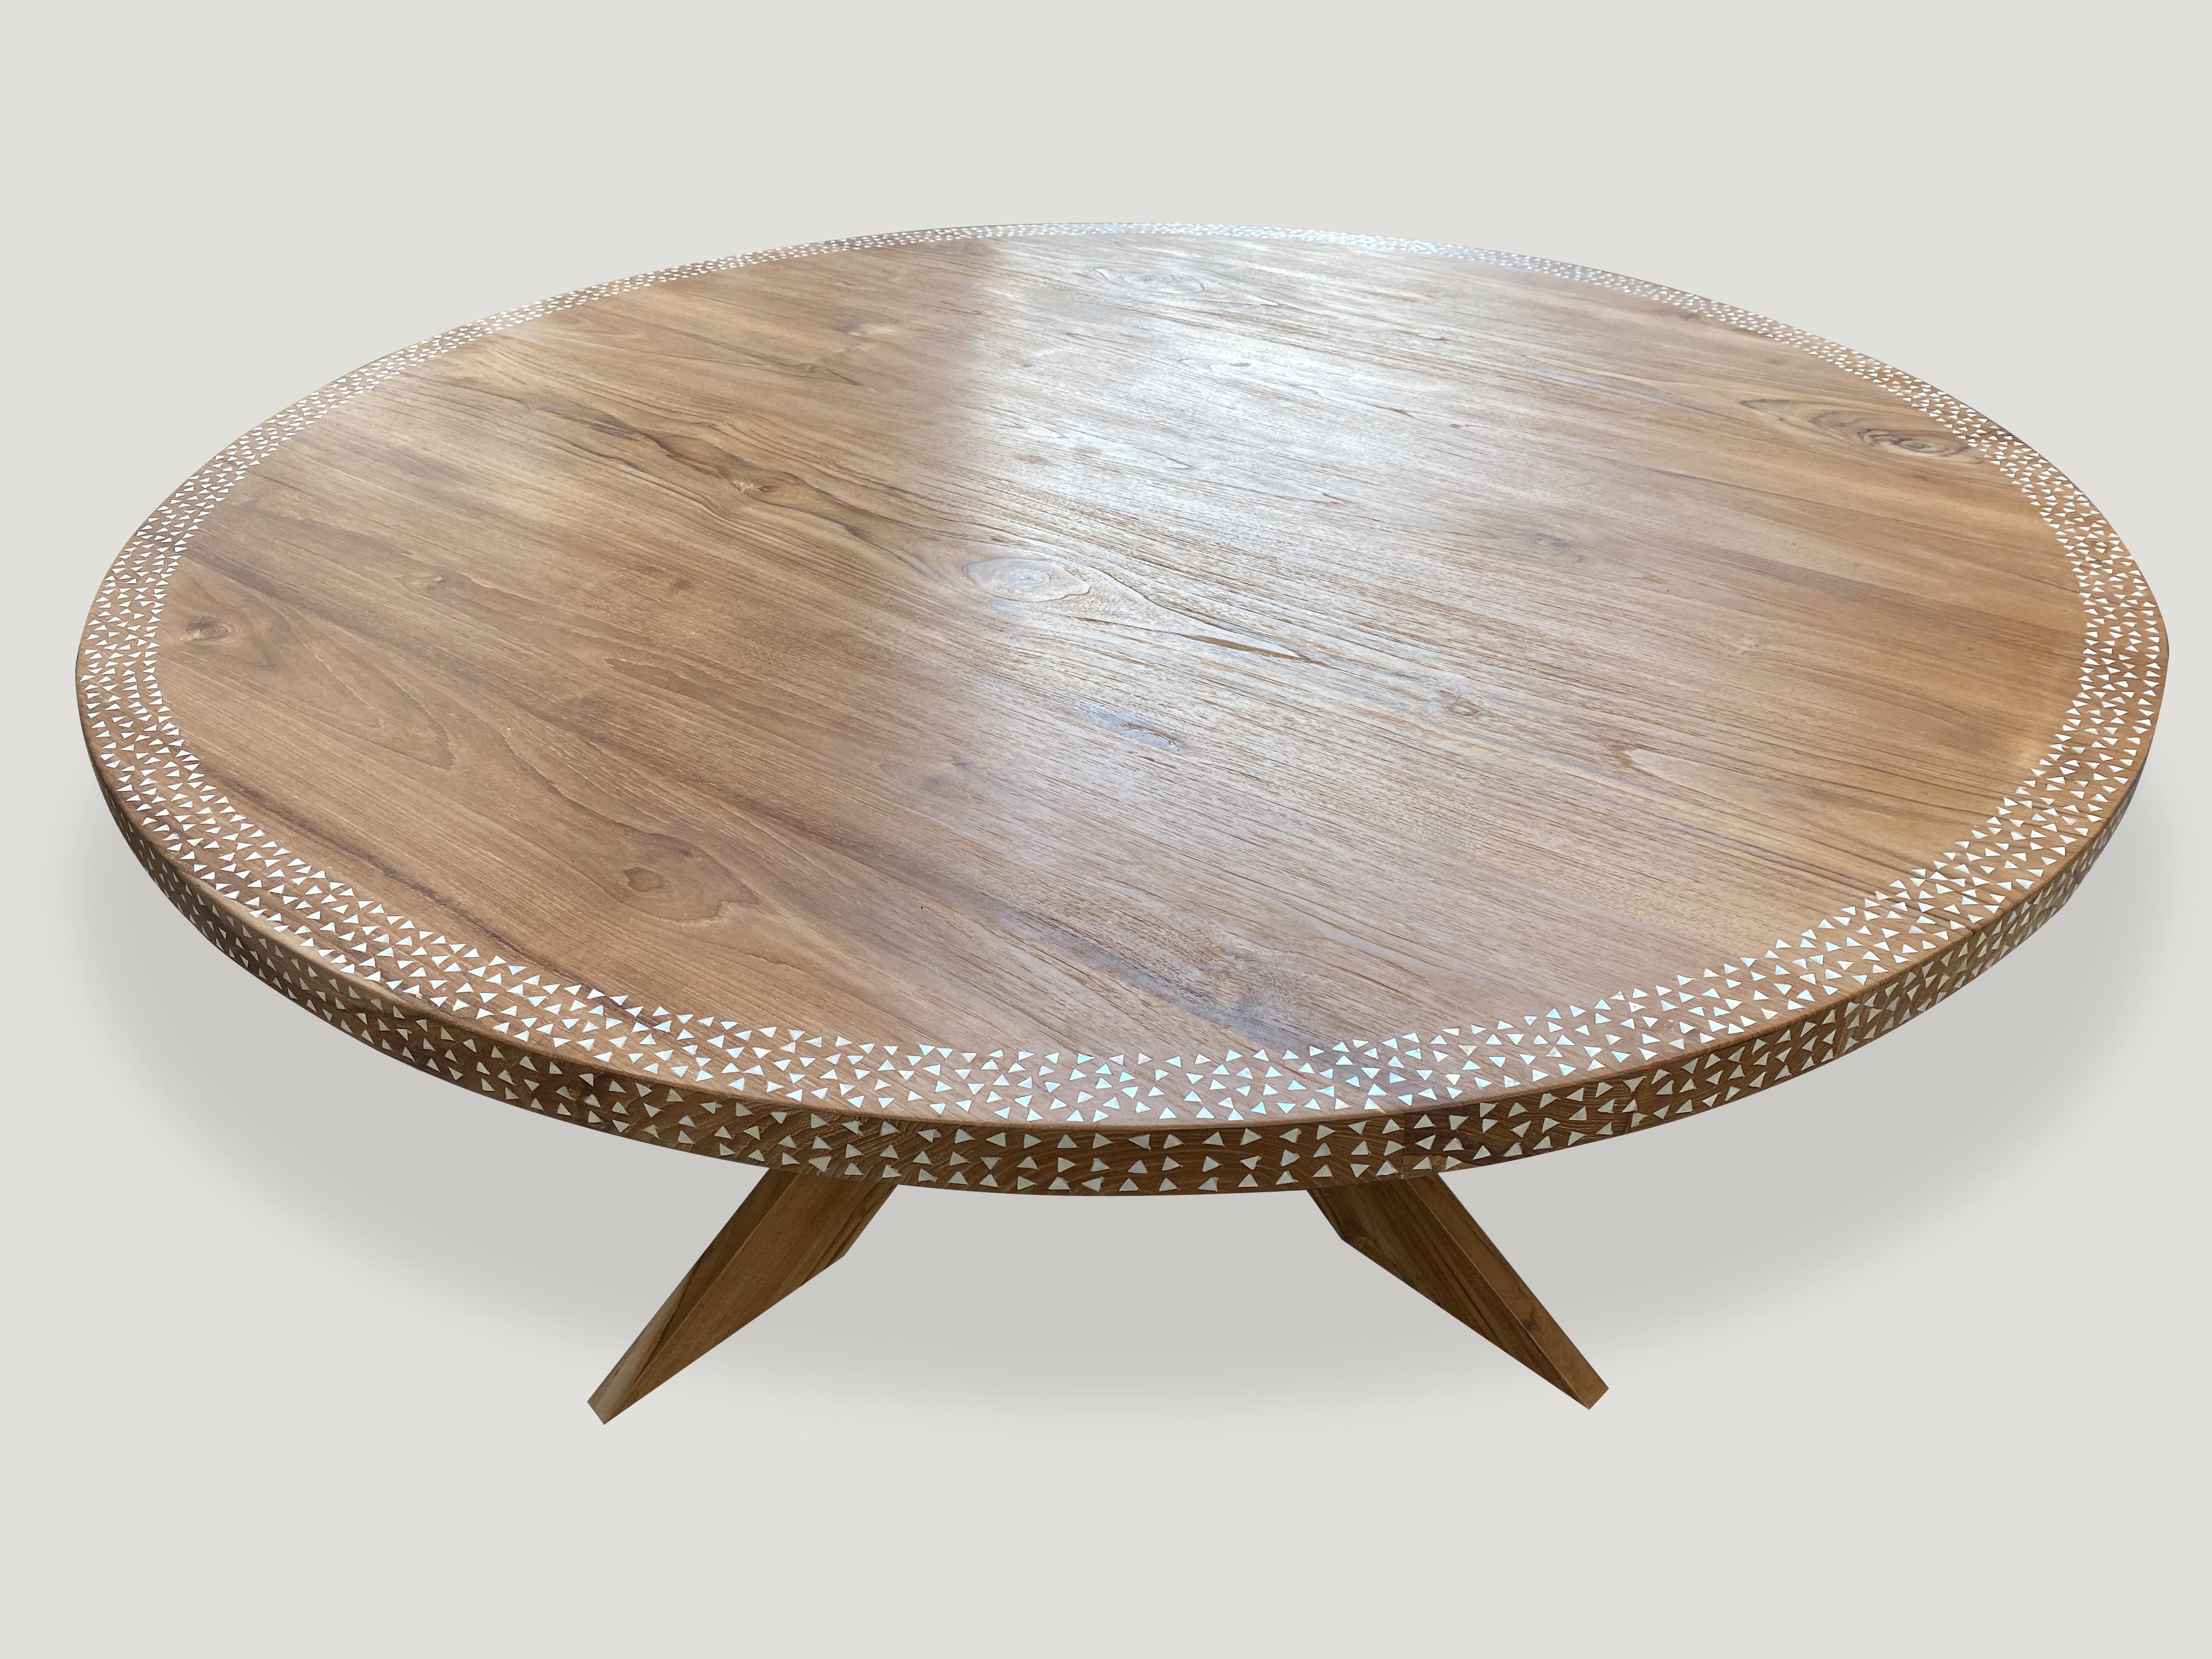 Contemporary Andrianna Shamaris Round Shell Inlaid Teak Wood Dining Table For Sale